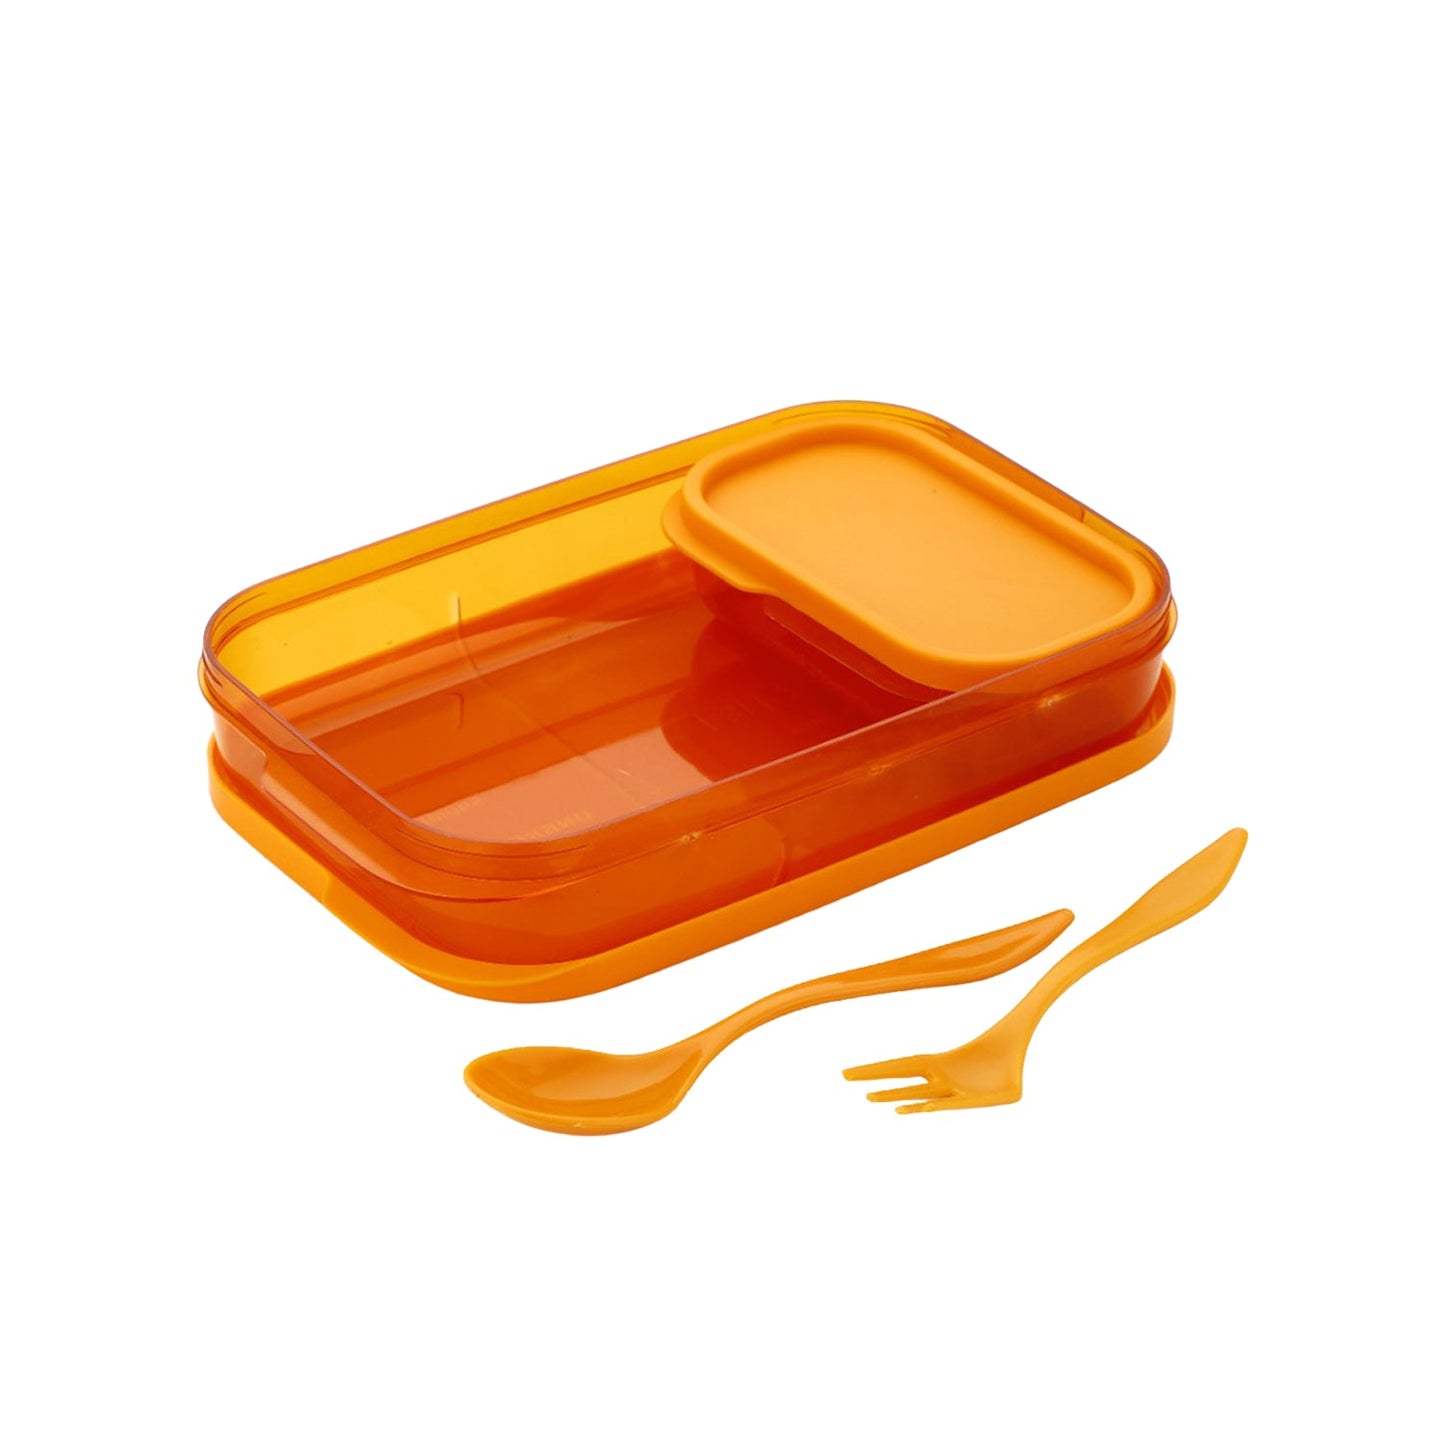 Premium Lunch Box for kids for school and picnic. Containers with Spoon and fork.